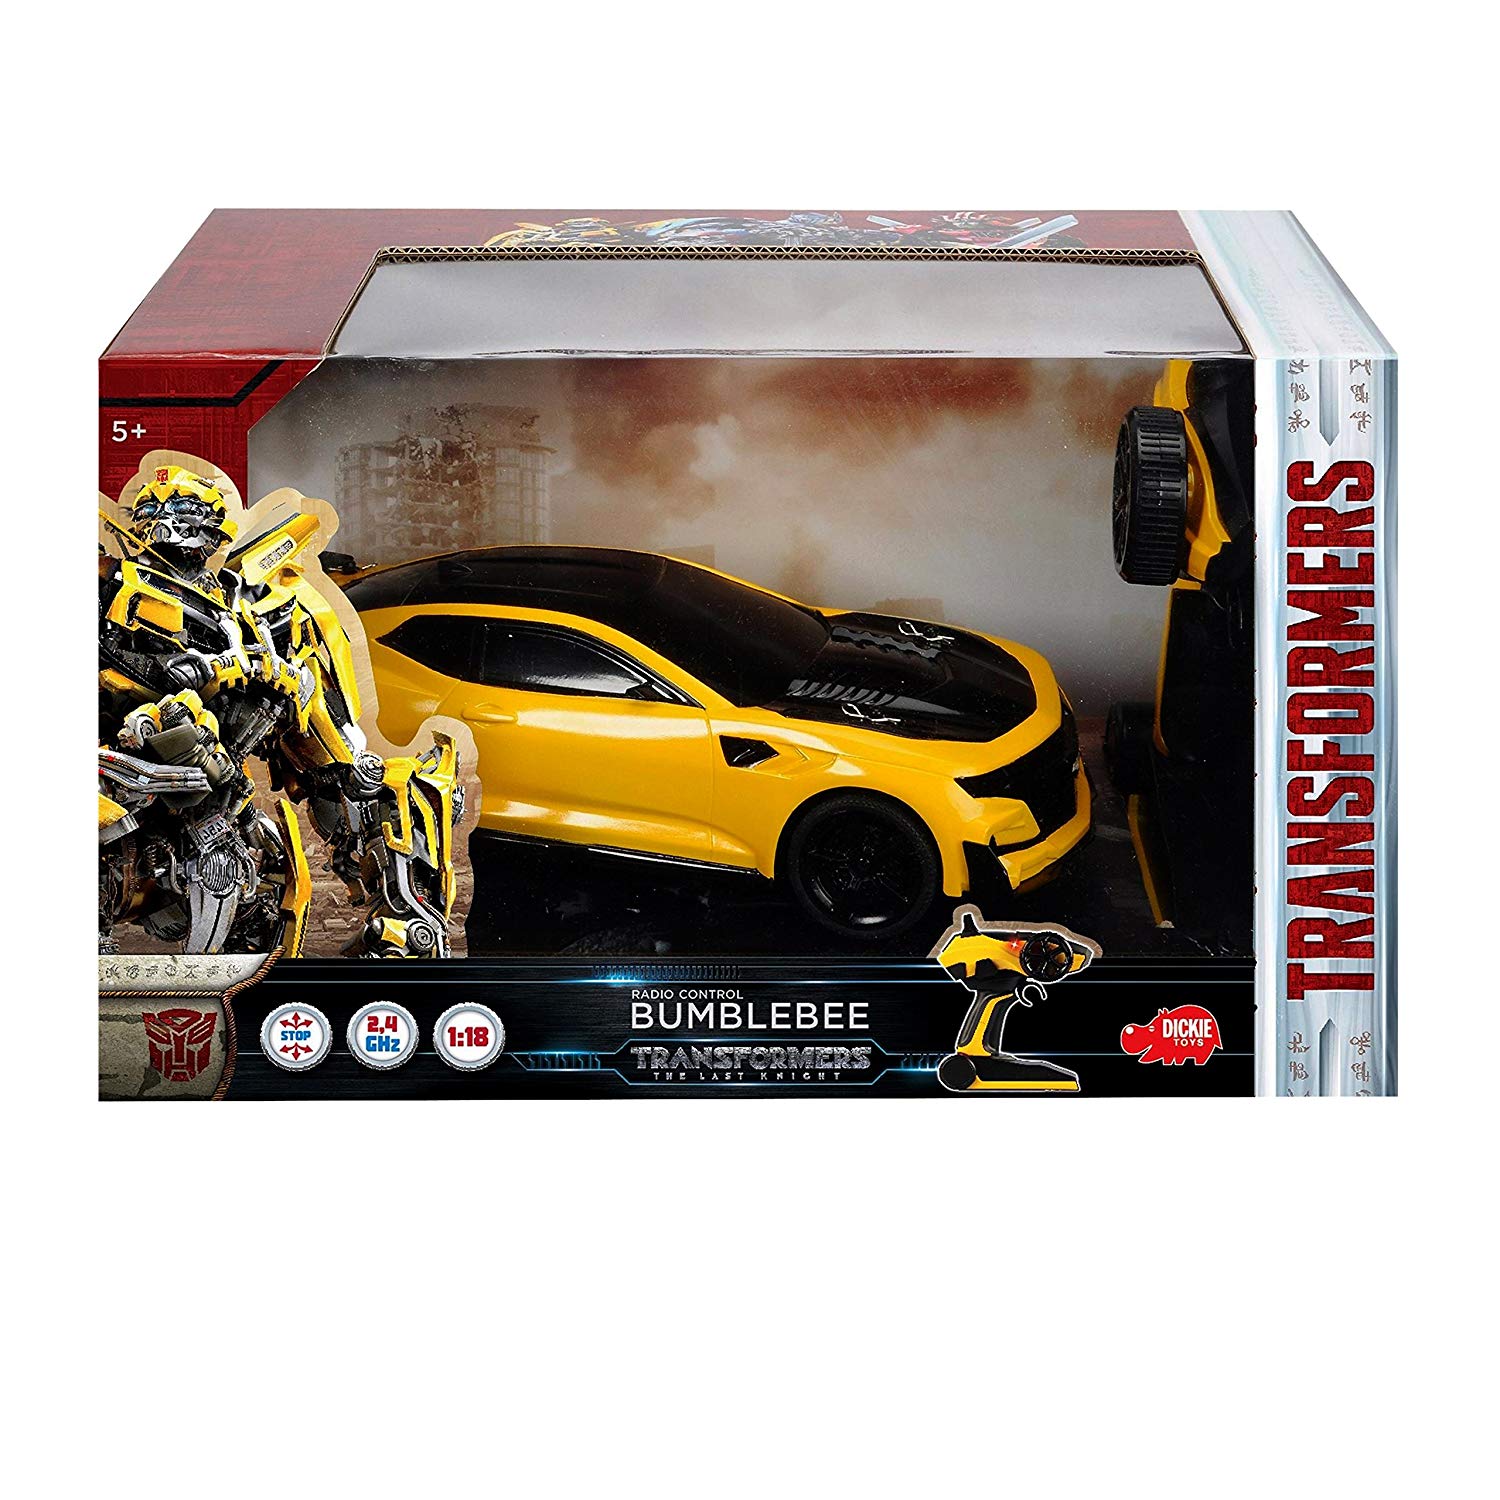 Dickie Toys 203117001 – Remote Control Transformers Bumblebee Game